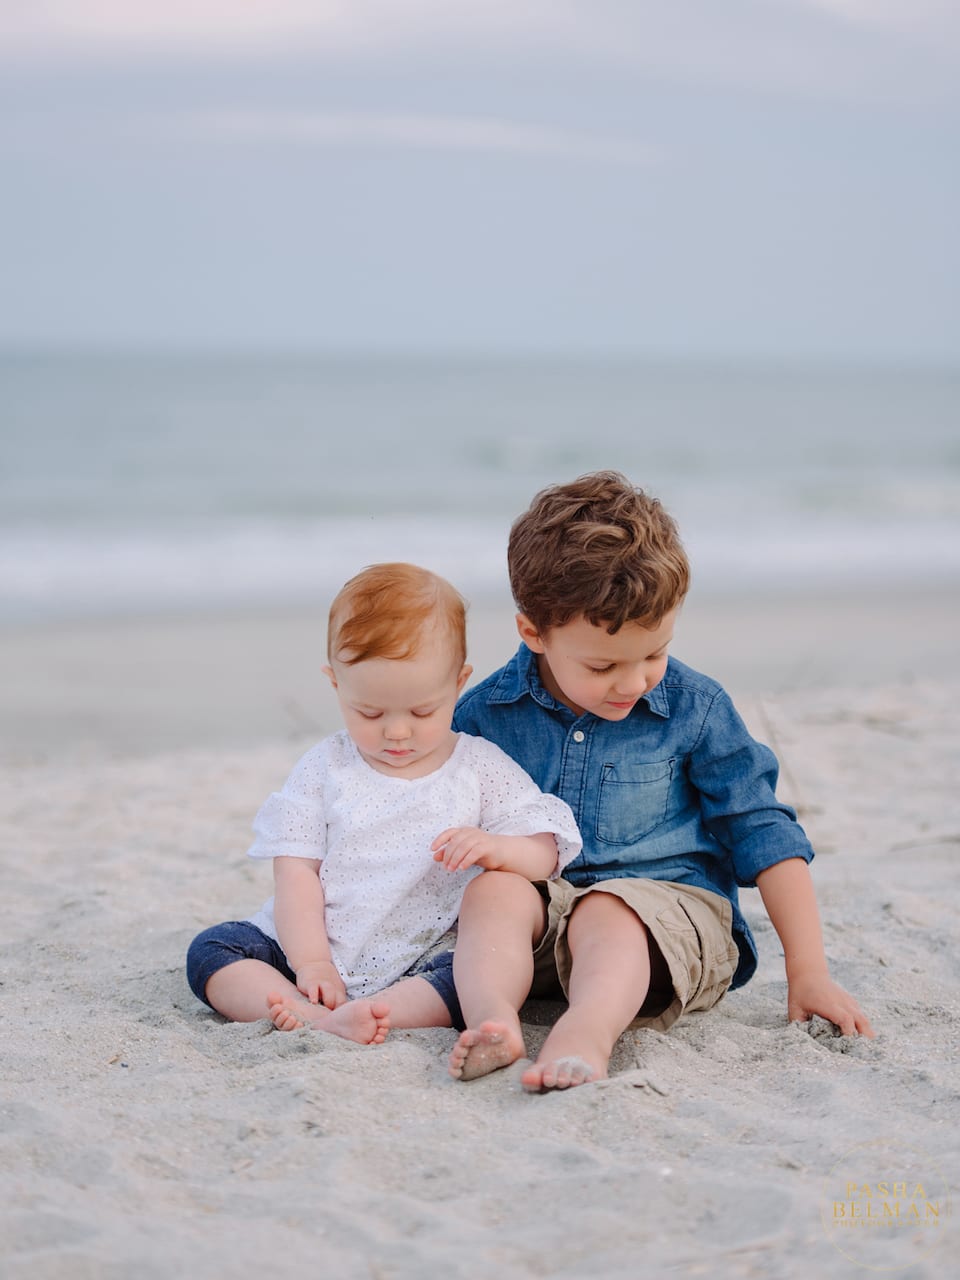 A Family Session in Myrtle Beach by Pasha Belman Photographer. Top Family Photography in Myrtle Beach and South Carolina 